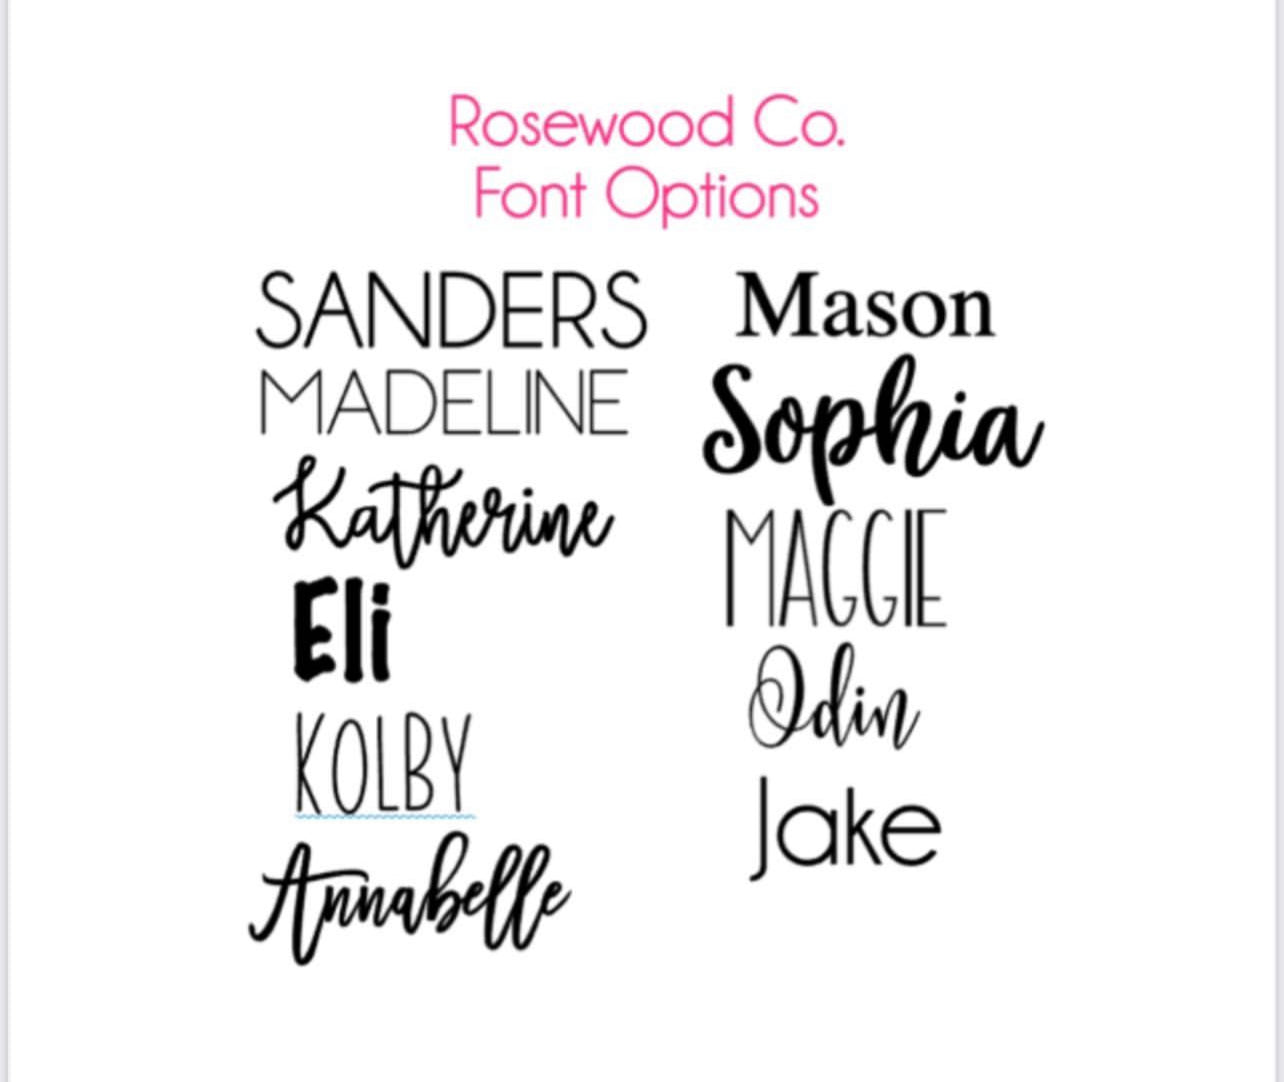 Rosewood Co. Personalized Engraved Birth Announcement